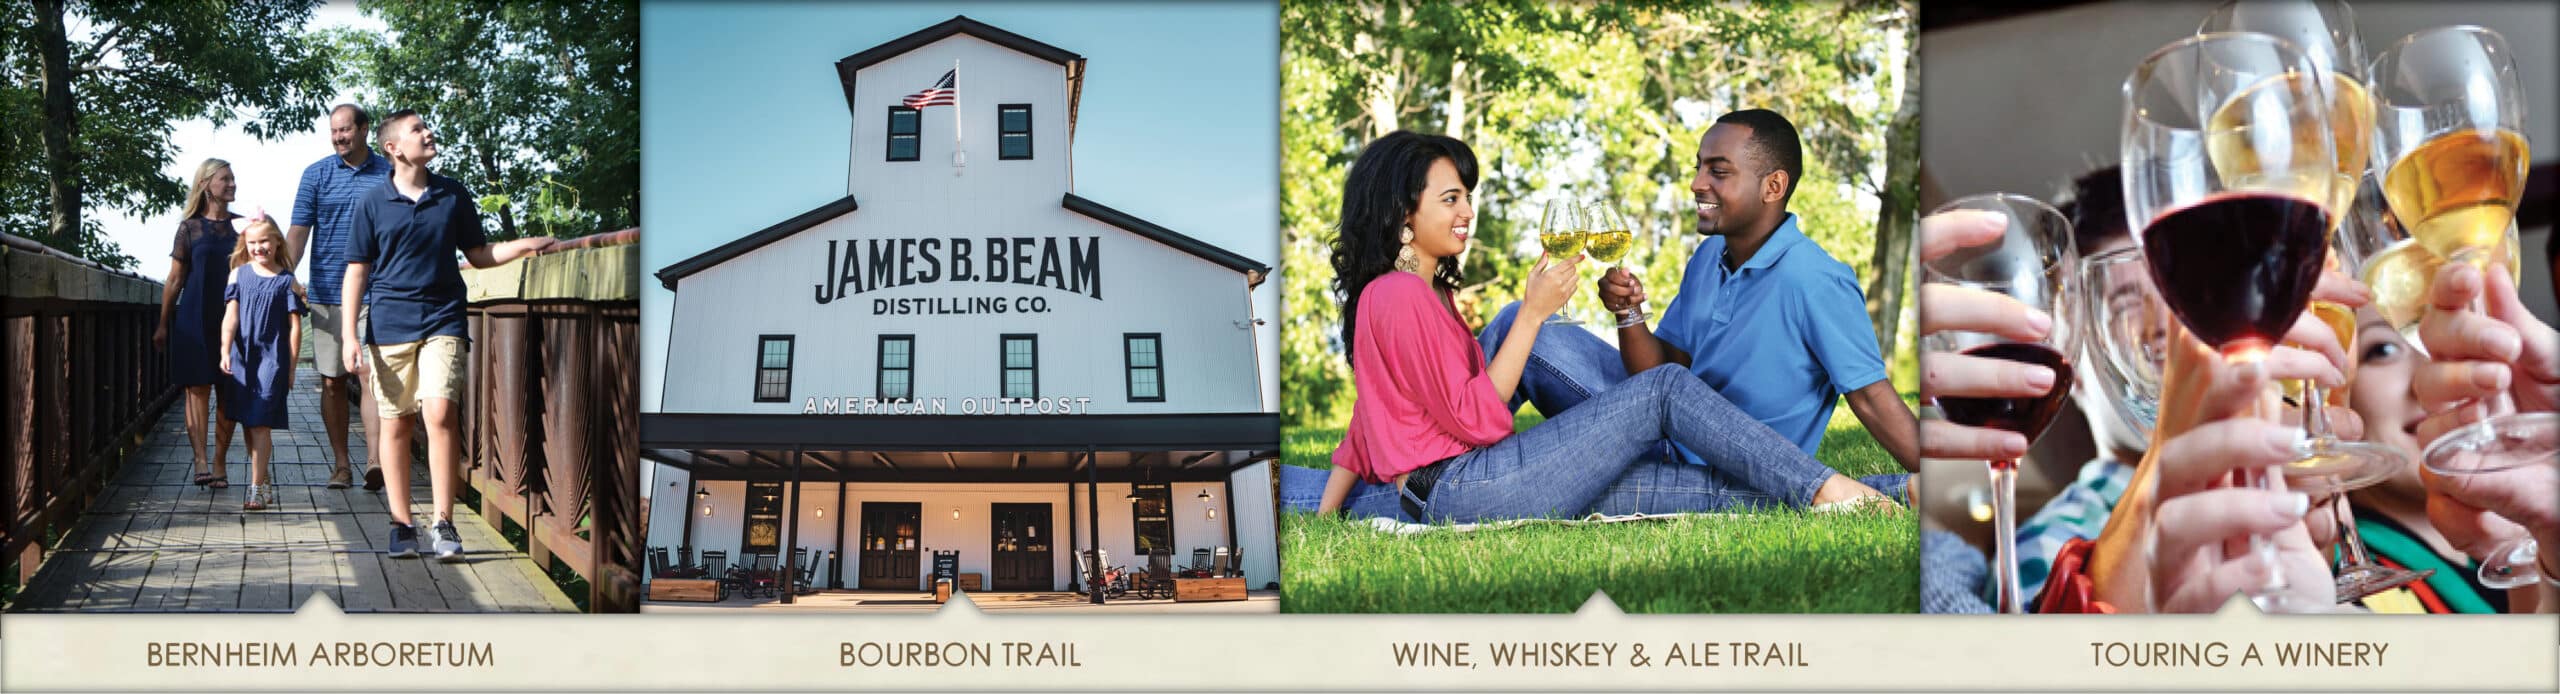 Header photo showcasing The Wine Whiskey and Ale Trail